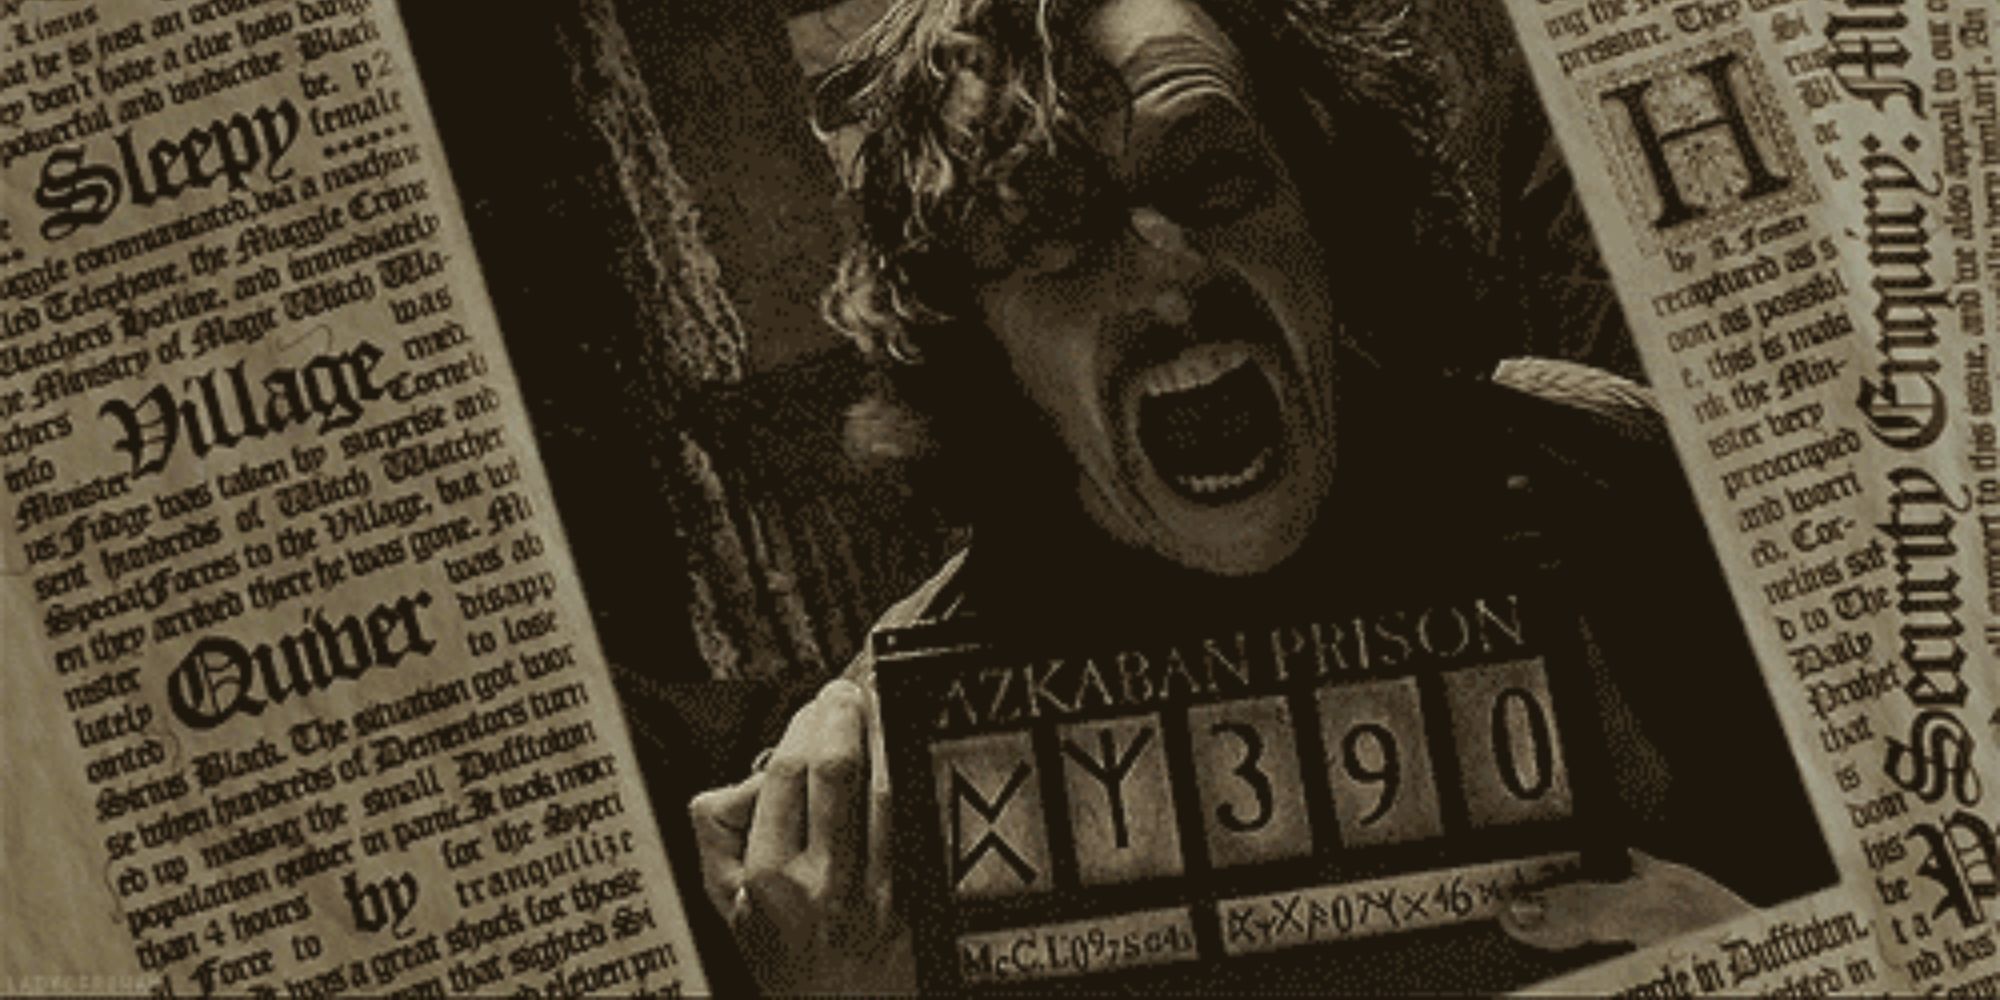 Sirius Black in the Daily Prophet newspaper - Harry Potter and the Prisoner of Azkaban